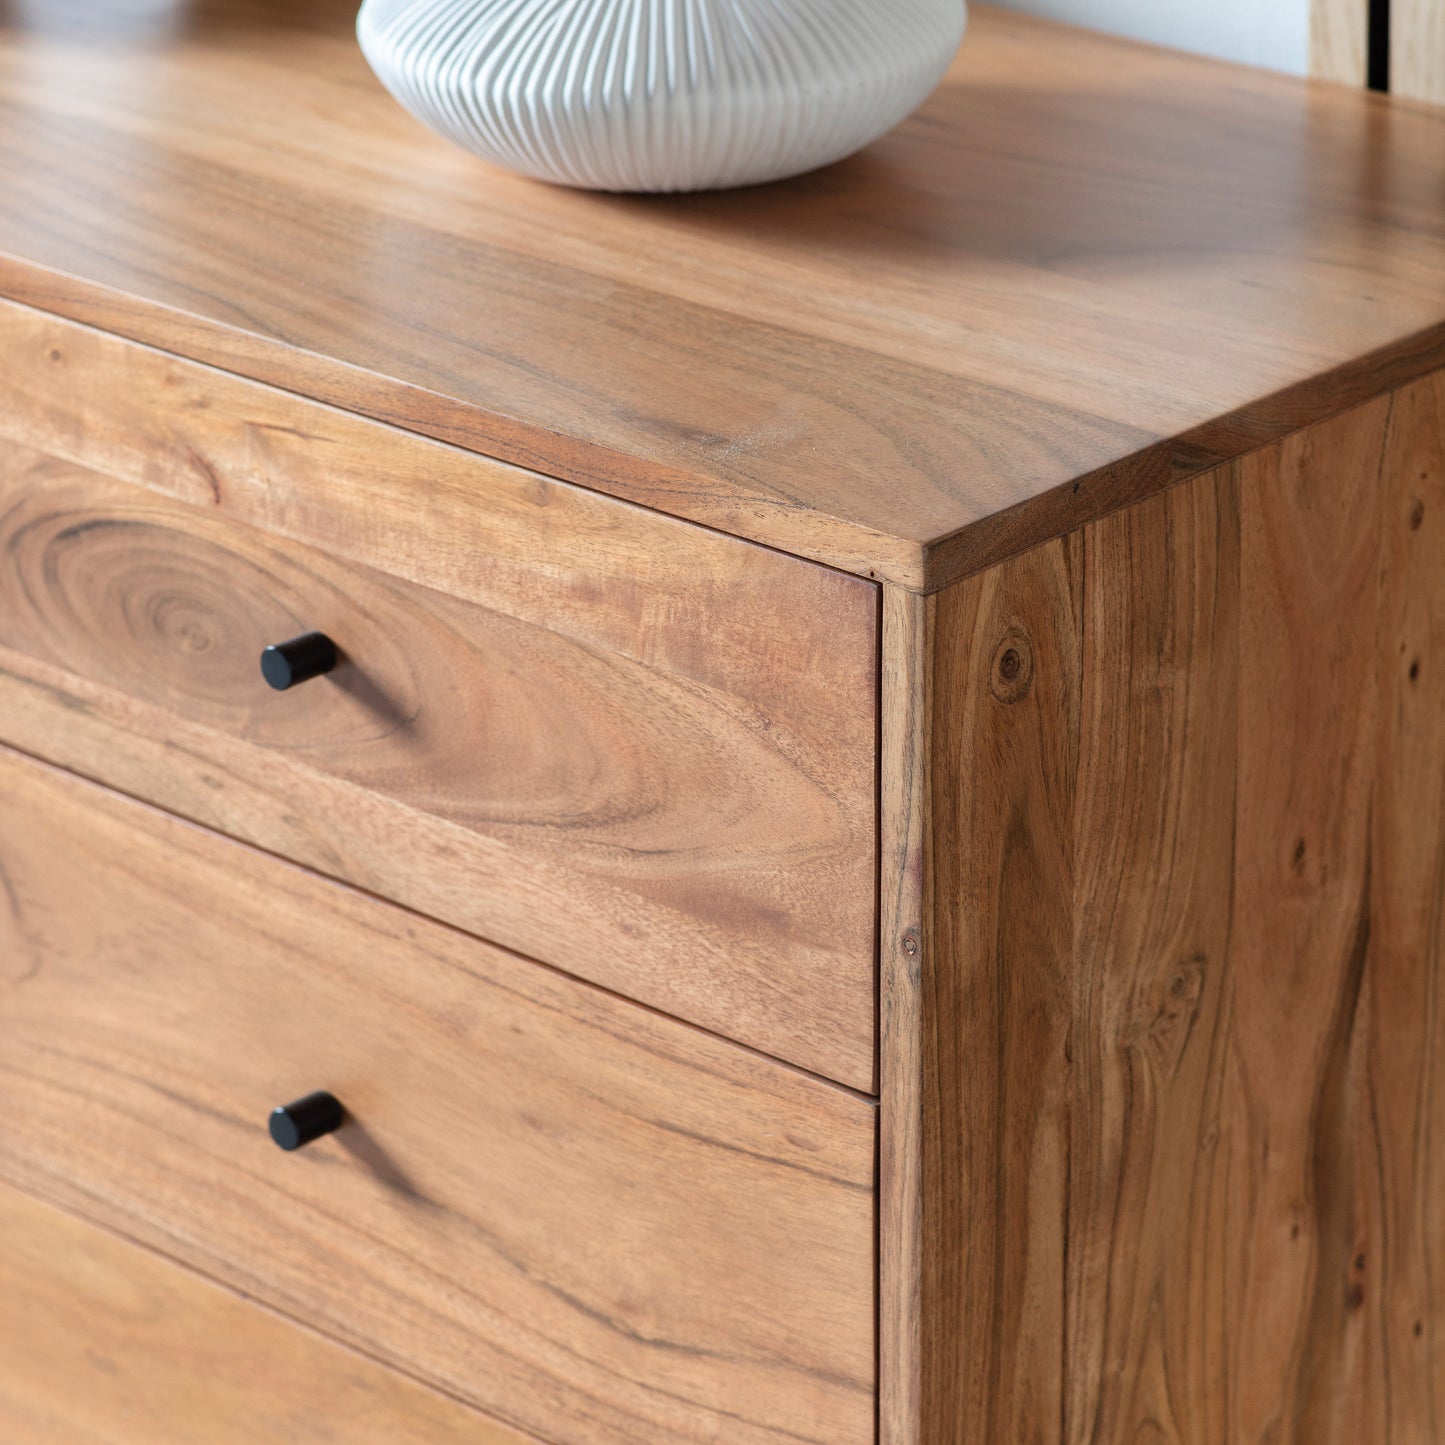 A home furniture sideboard from Kikiathome.co.uk with interior decor featuring a vase on top.